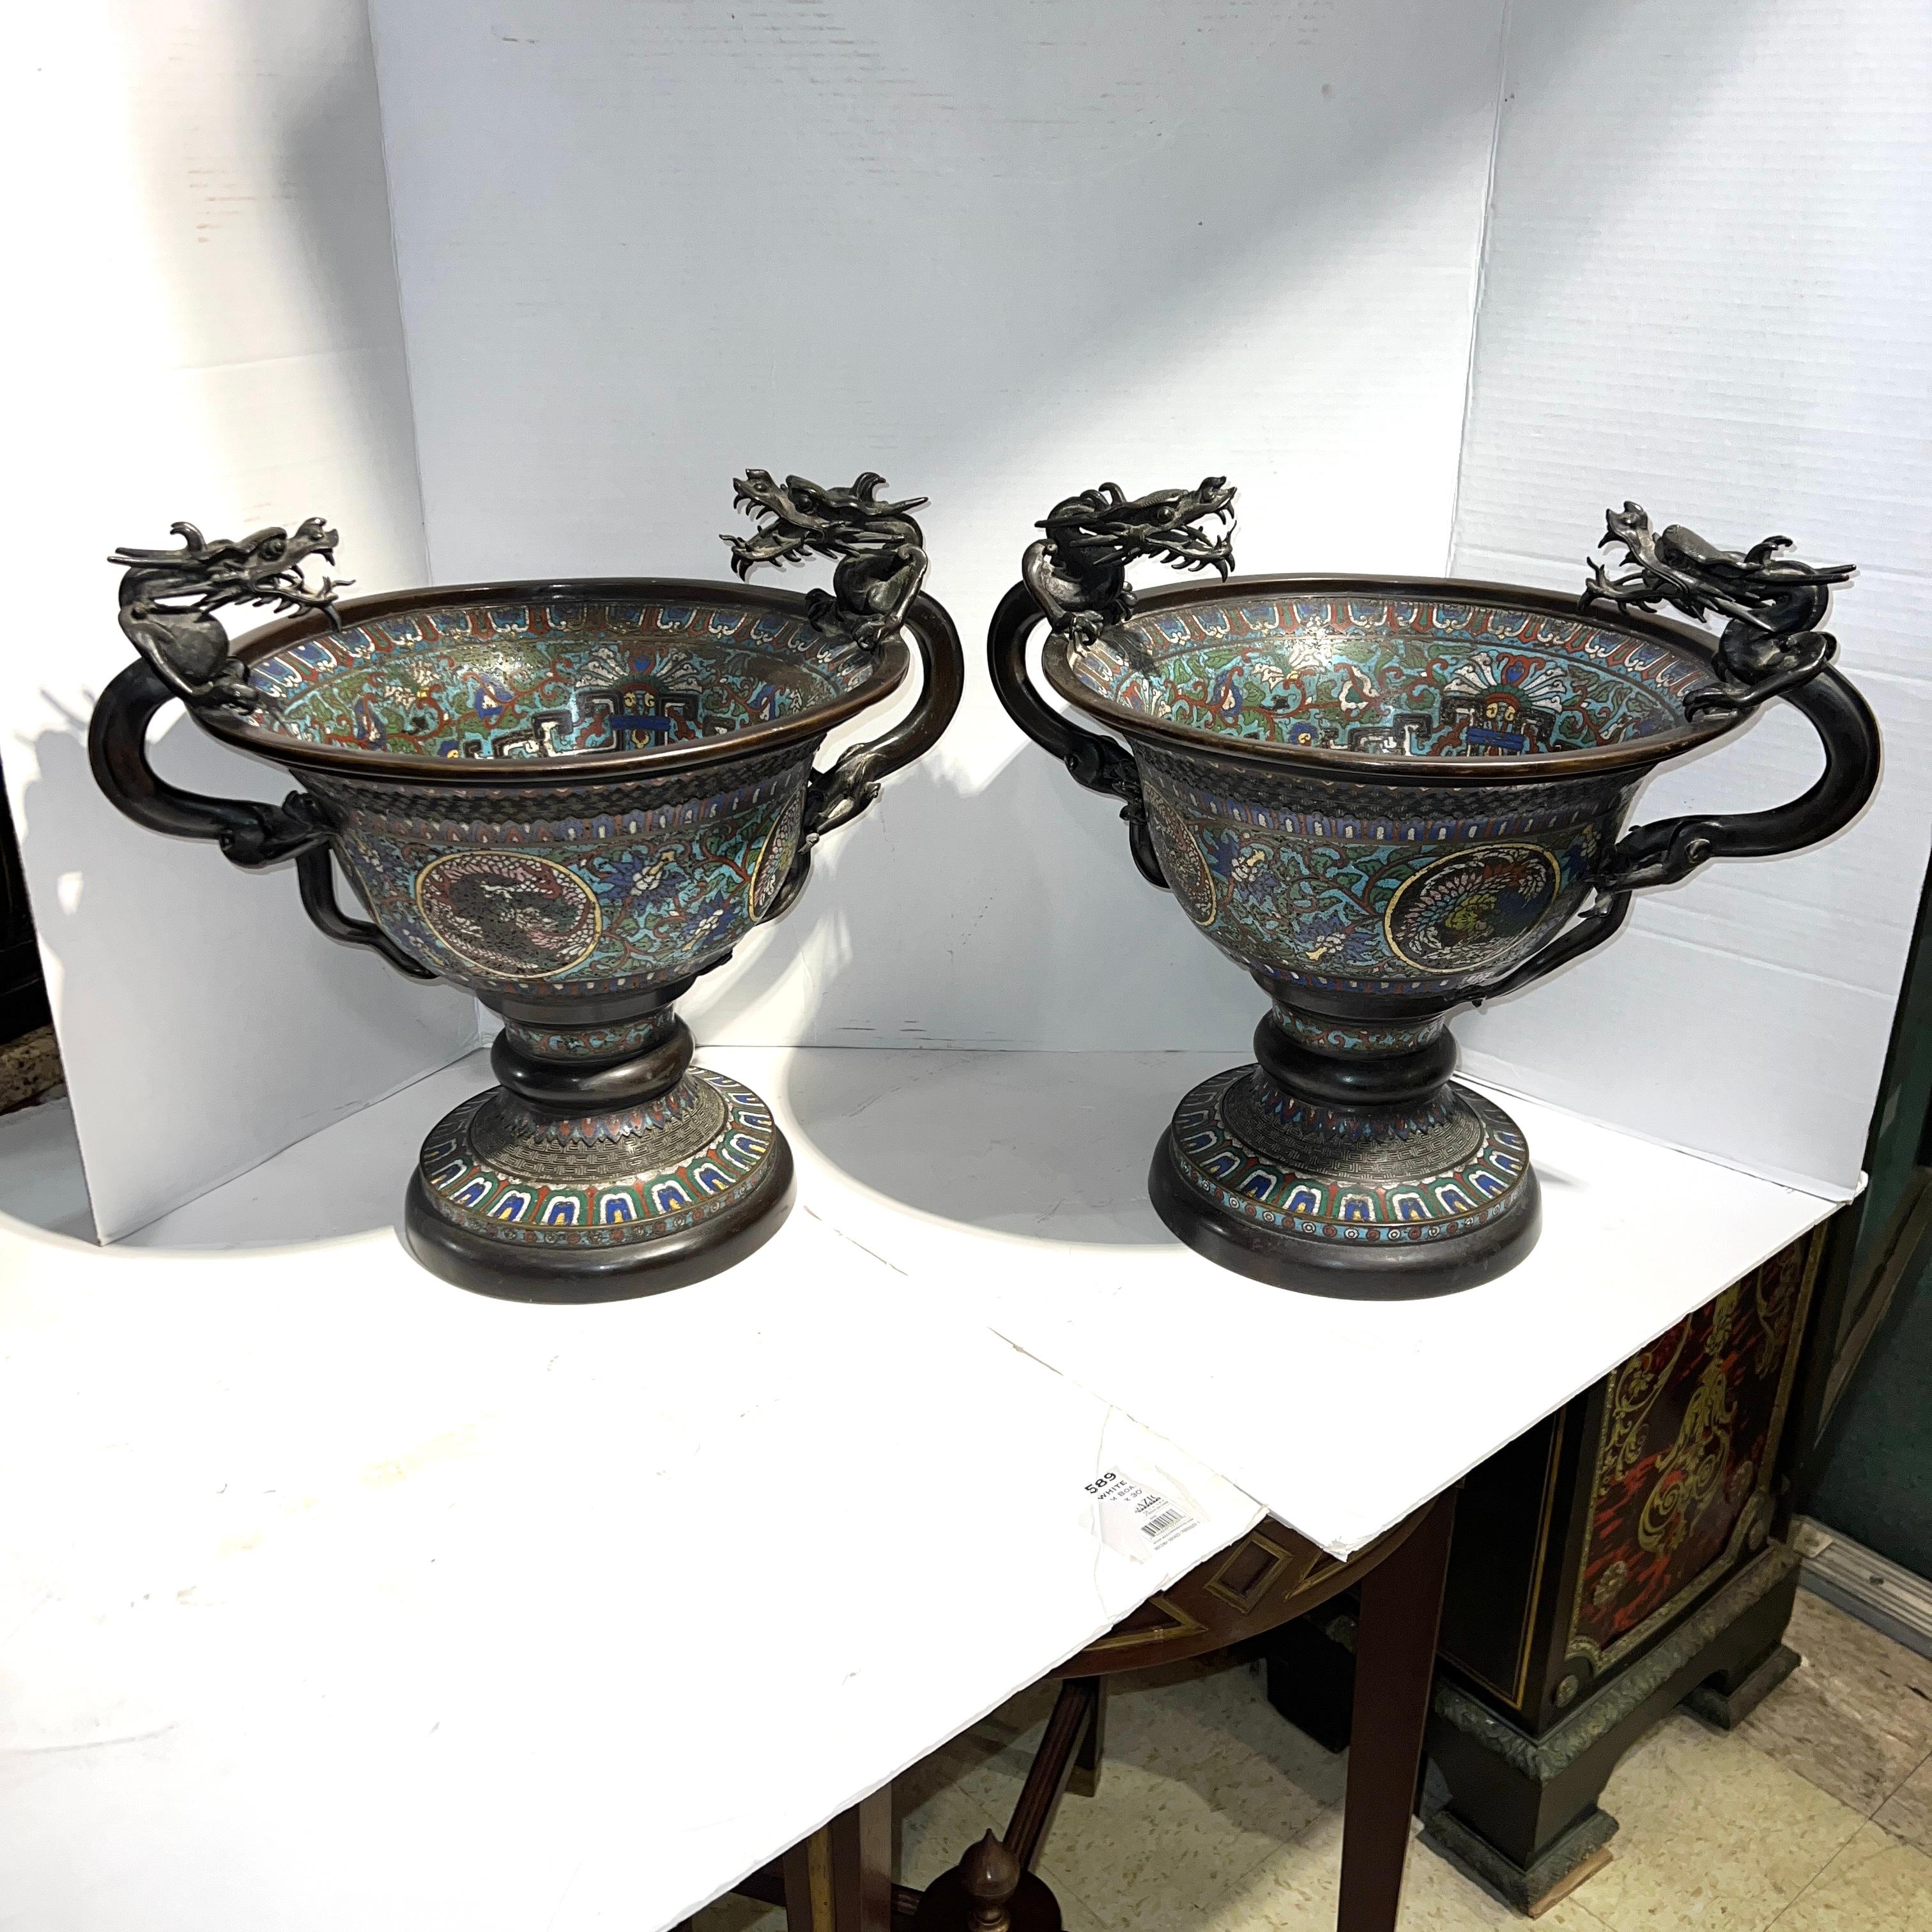 Pair of impressive, large antique (19th century) Chinese centerpiece bowls in the archaic style with prominent dragon form handles and champleve enamel designs.  18 inches across and 14 3/8 inches tall.